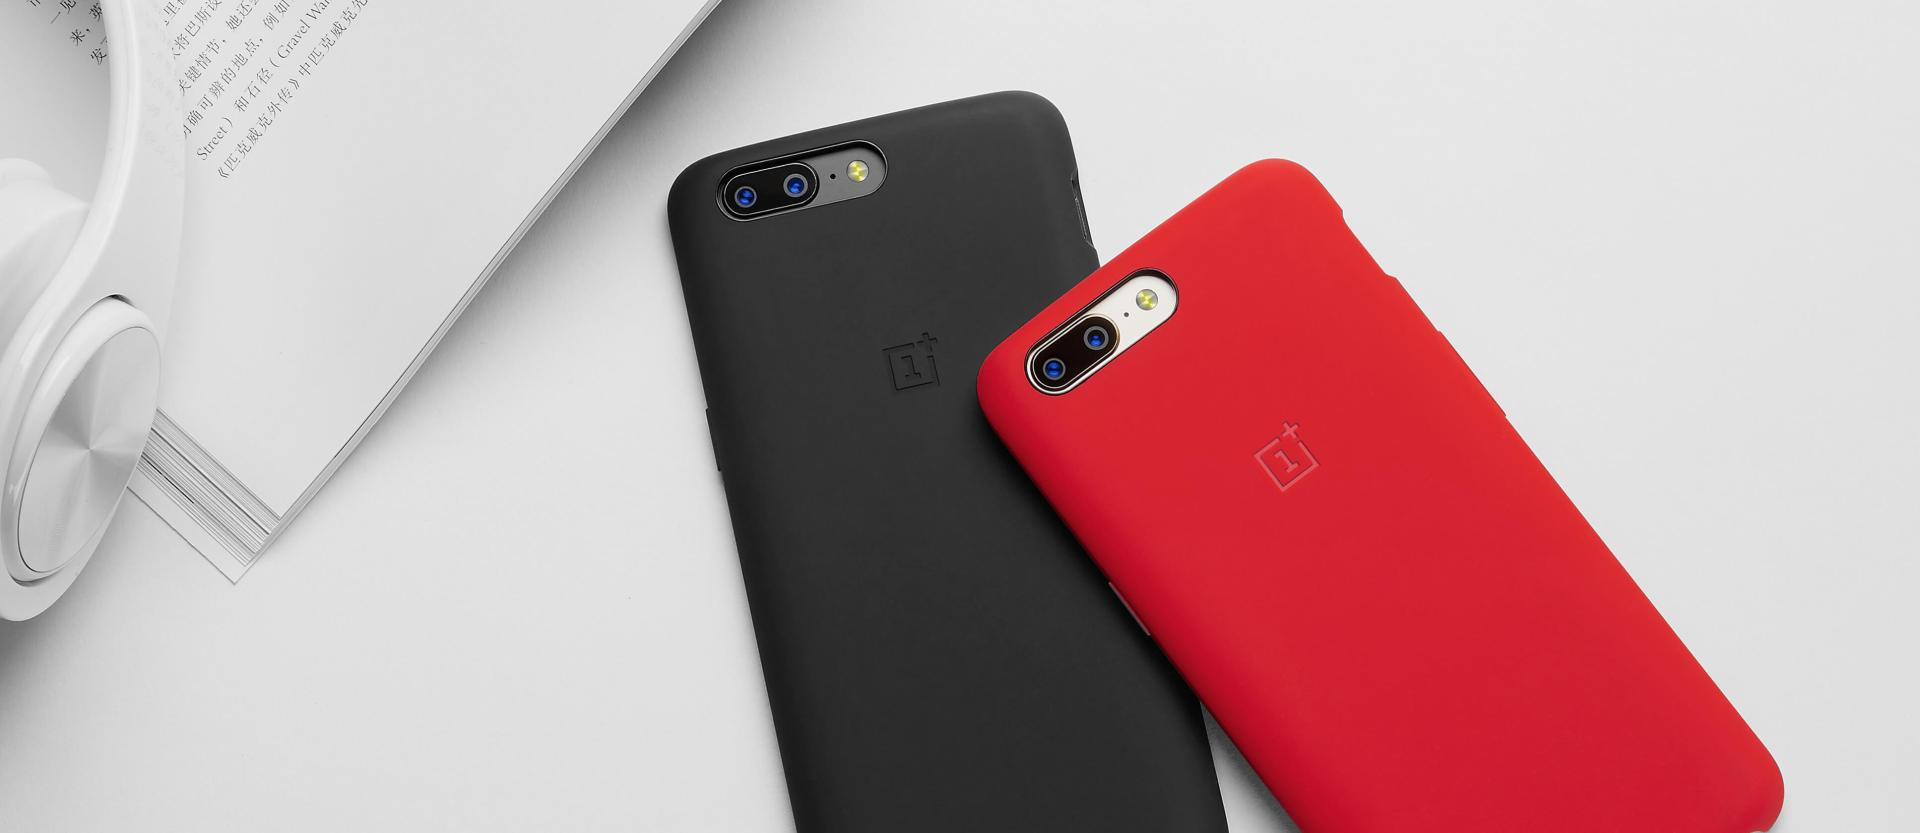 OnePlus 5 Silicone Protective Case